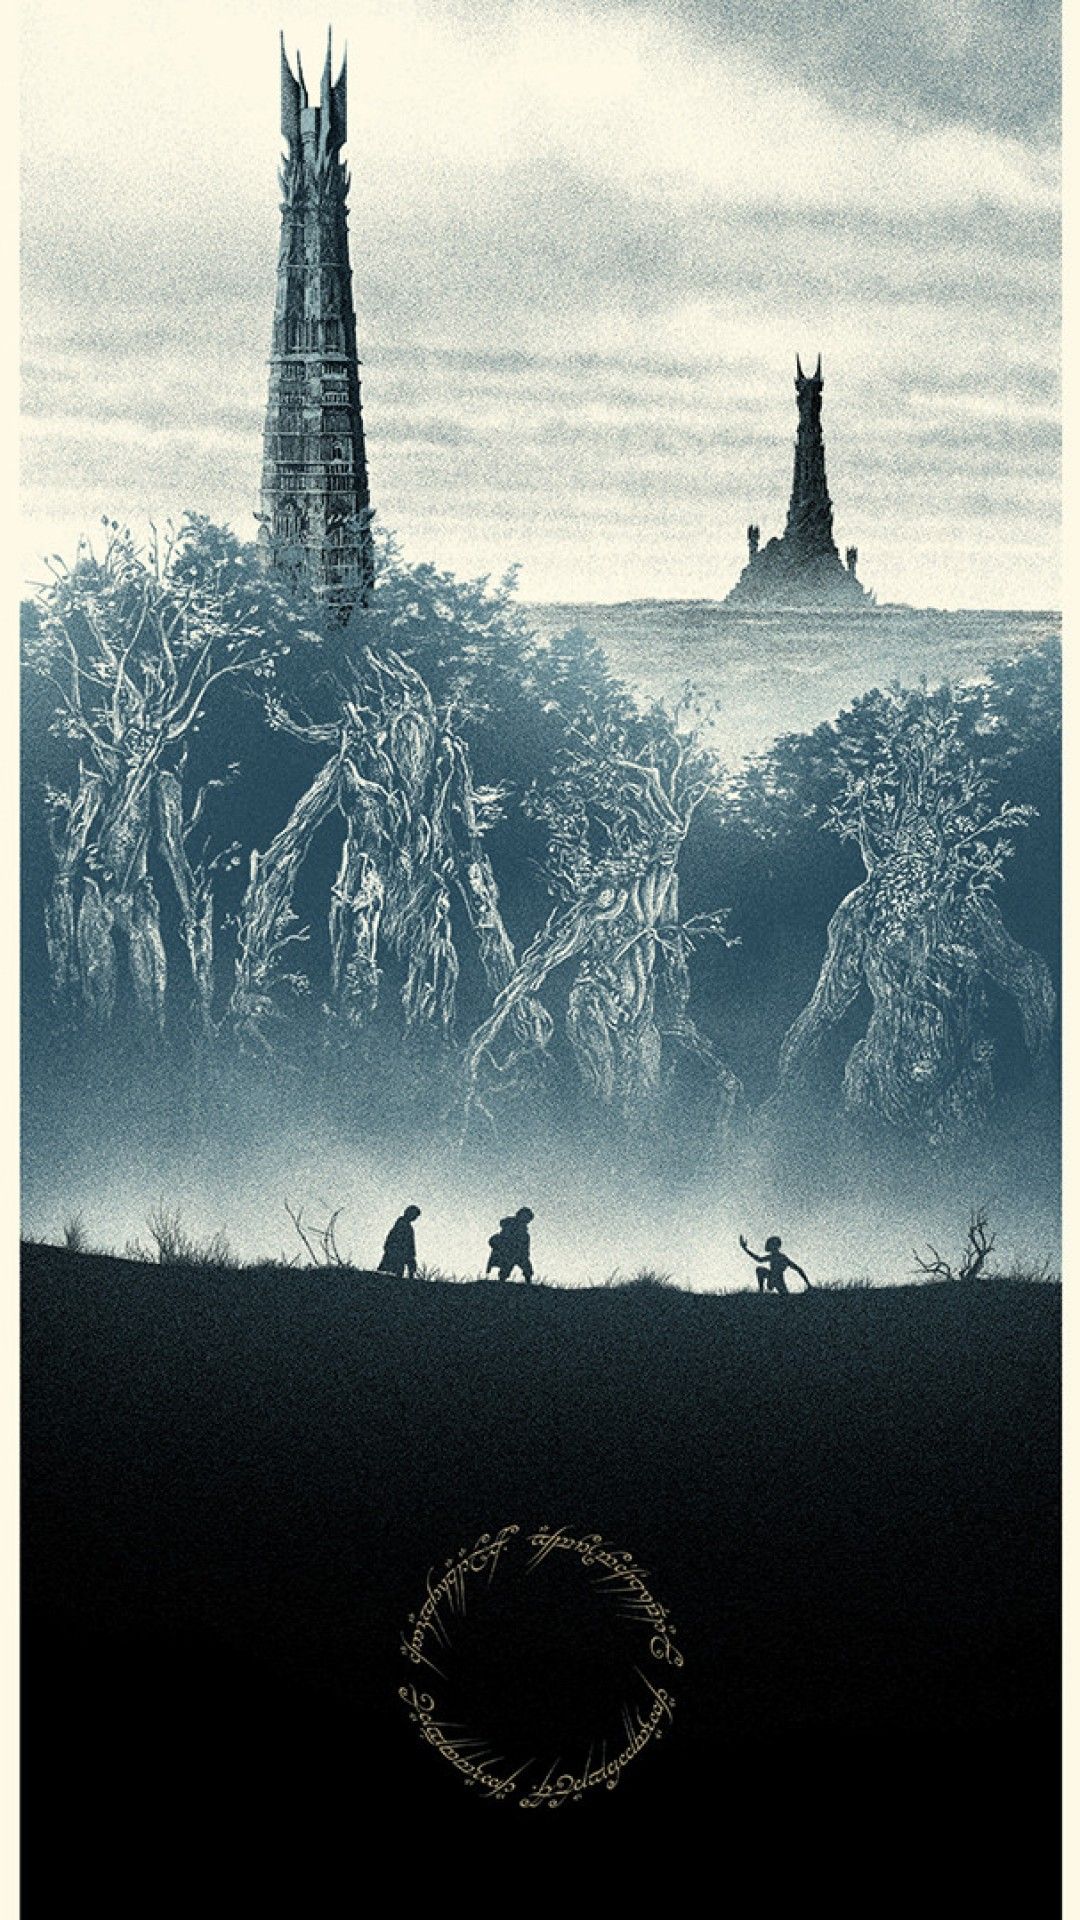 Lord of the rings iphone wallpaper